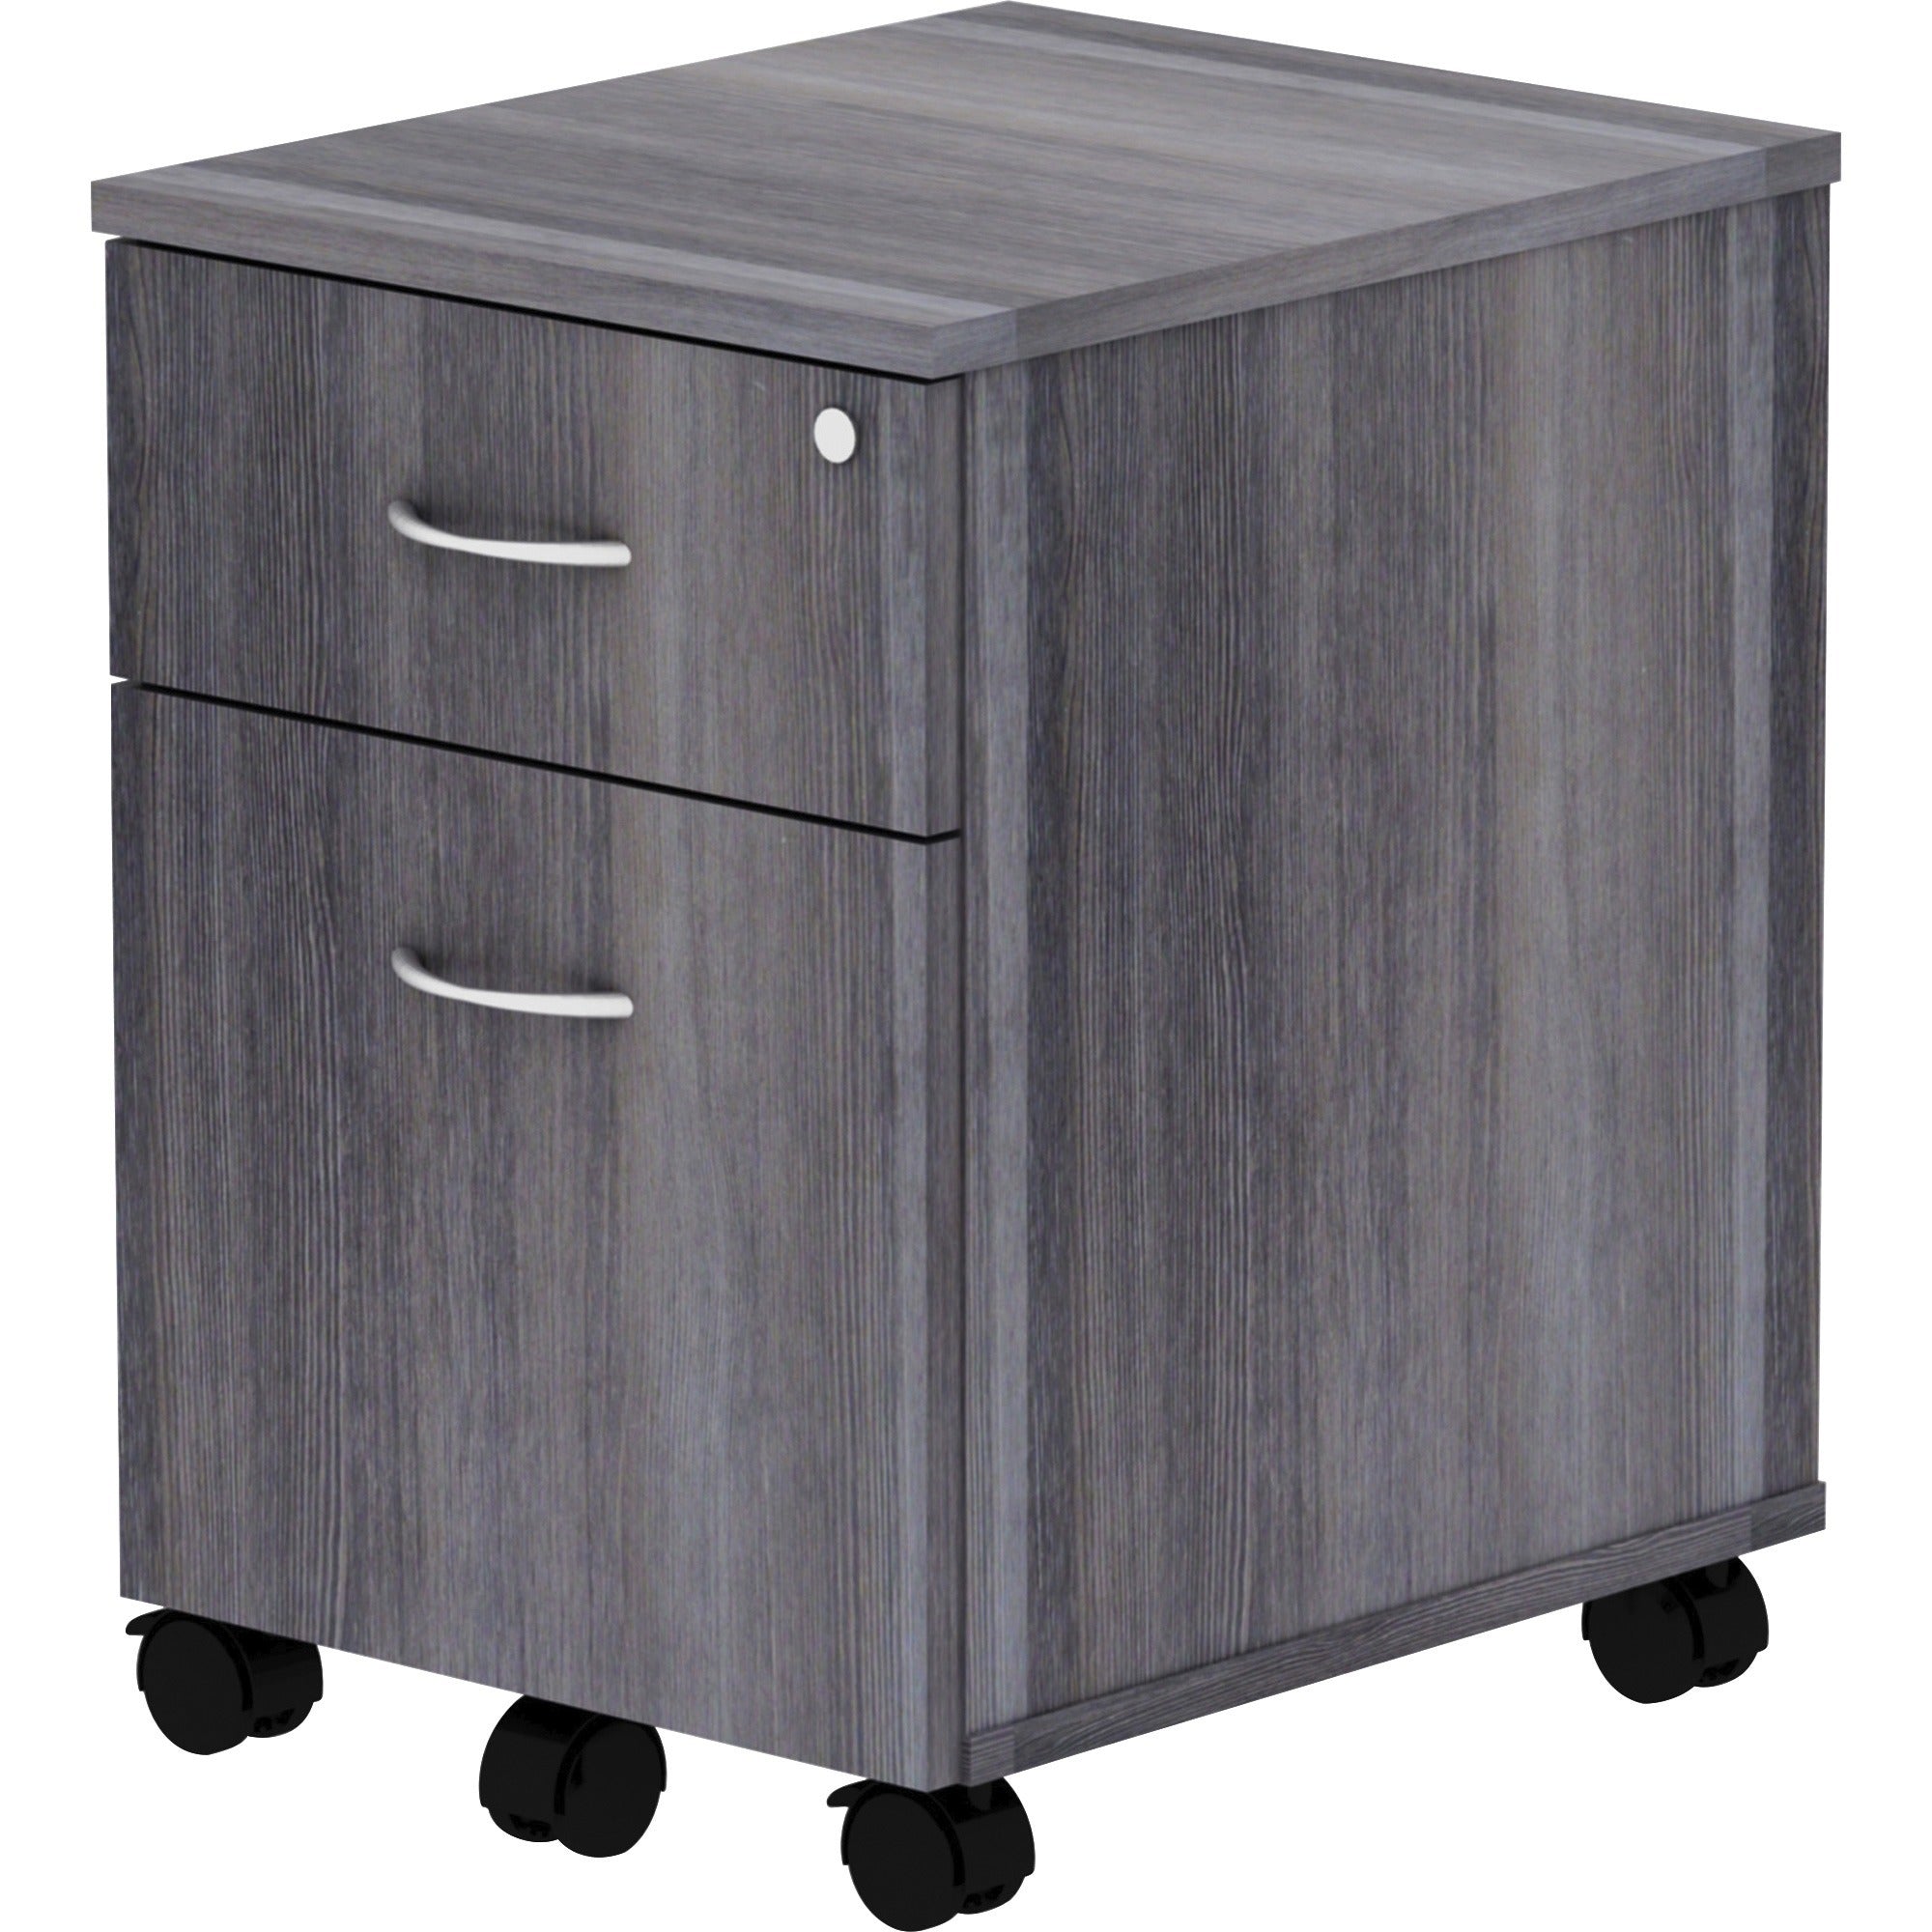 lorell-relevance-series-2-drawer-file-cabinet-158-x-199229-2-x-file-box-drawers-finish-weathered-charcoal-laminate_llr16217 - 3